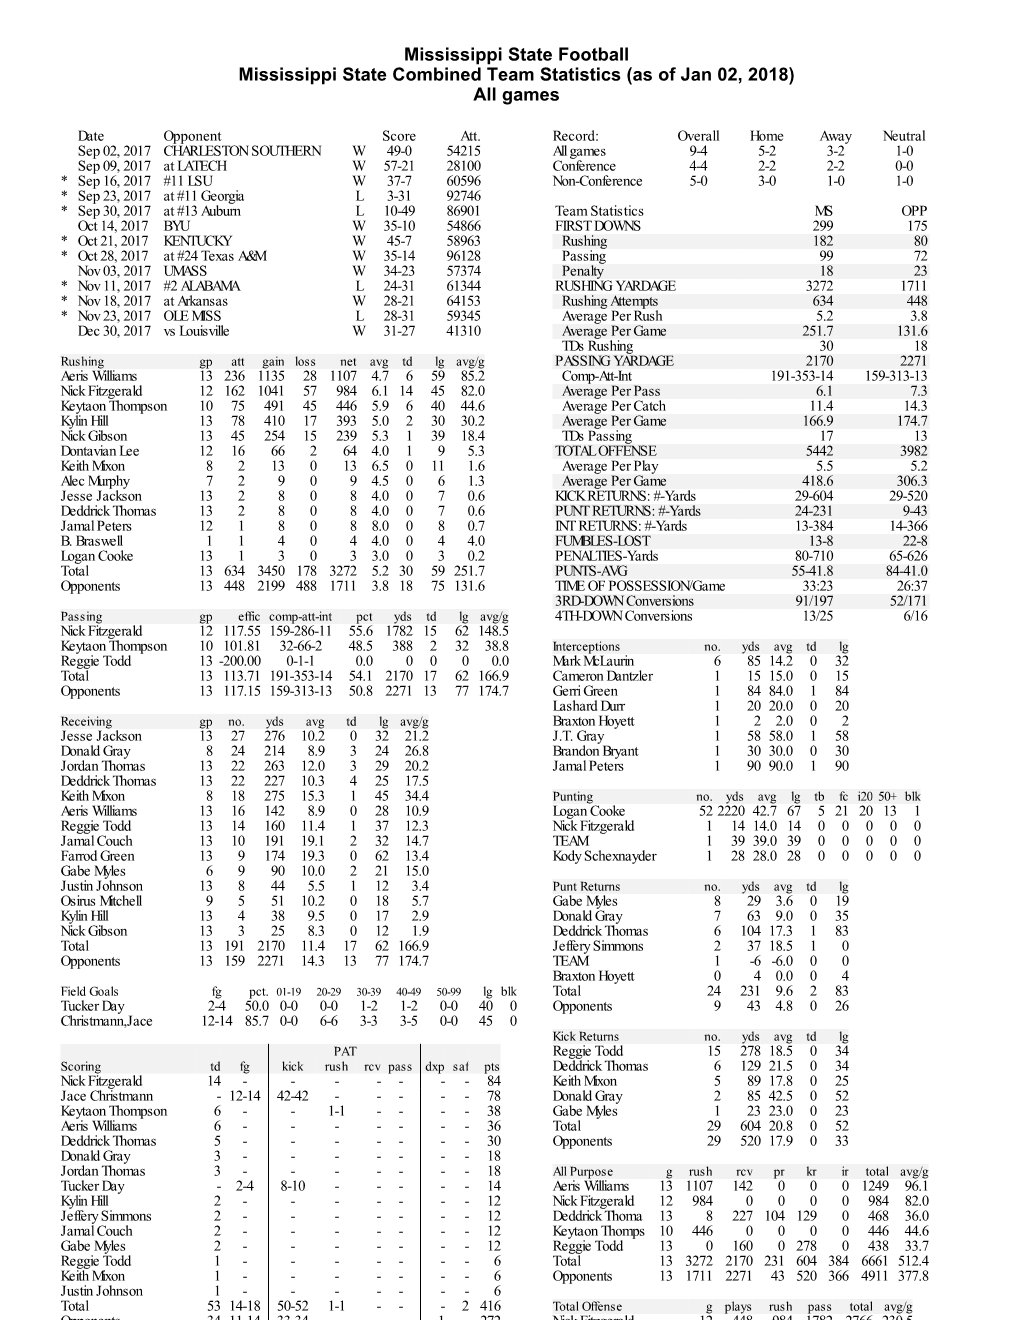 Mississippi State Football Mississippi State Combined Team Statistics (As of Jan 02, 2018) All Games